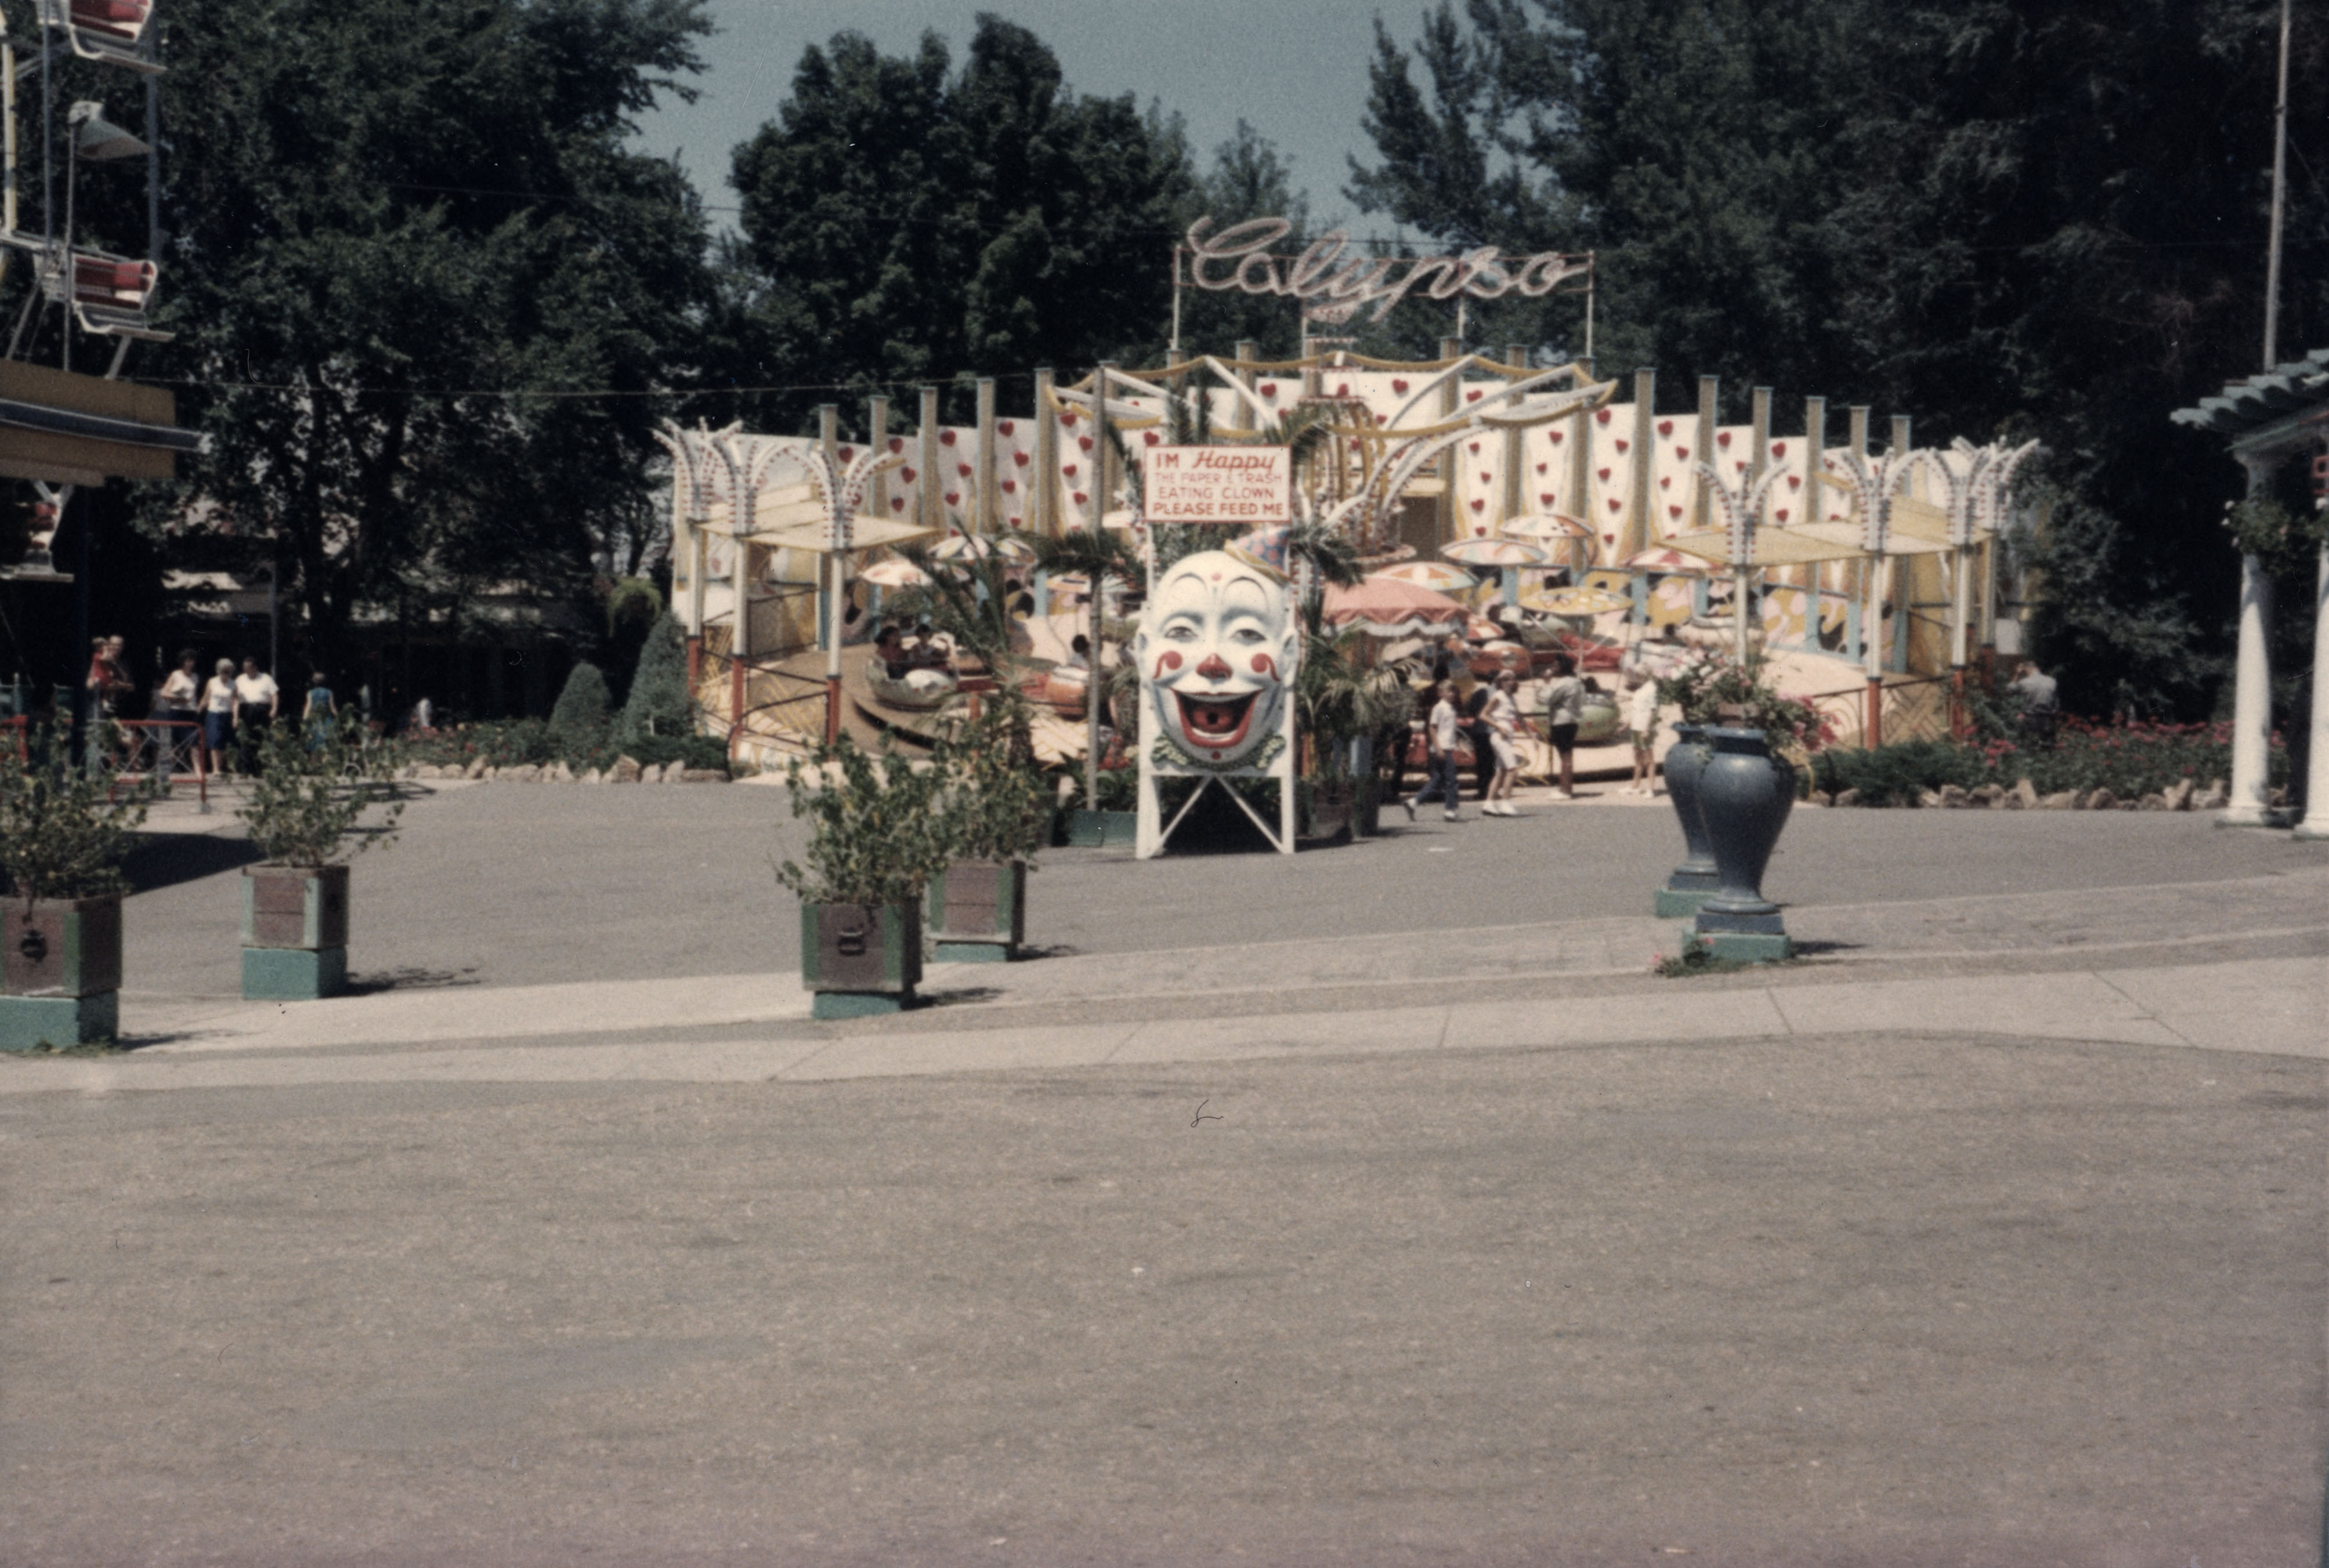 Photo of Elitch Gardens. In the background is the Calypso ride, which is stationary in this image and a few people are walking toward the gate to enter the ride. In front of the ride is a large white clown face, with its mouth open wide and its large red tongue has a large hole in the center. The clown is staring straight ahead. Above the face is a sign that reads "I'm Happy the Paper & Trash Eating Clown. Please feed me."